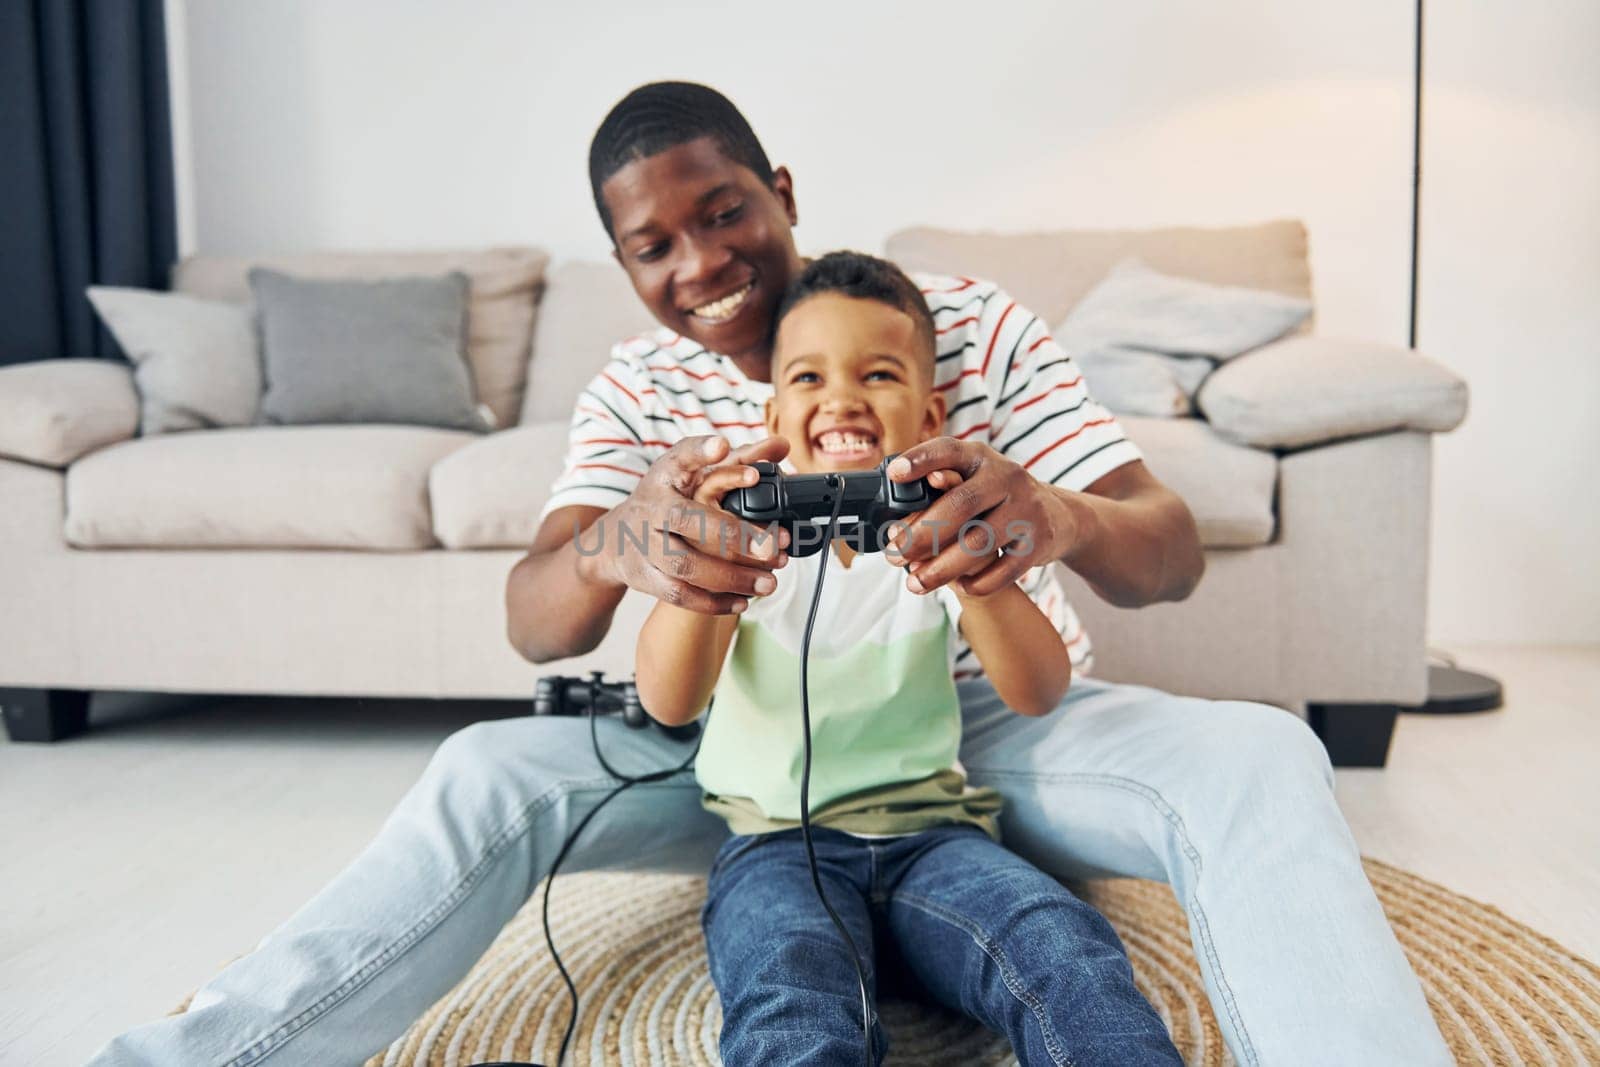 Using joysticks to play video game. African american father with his young son at home.